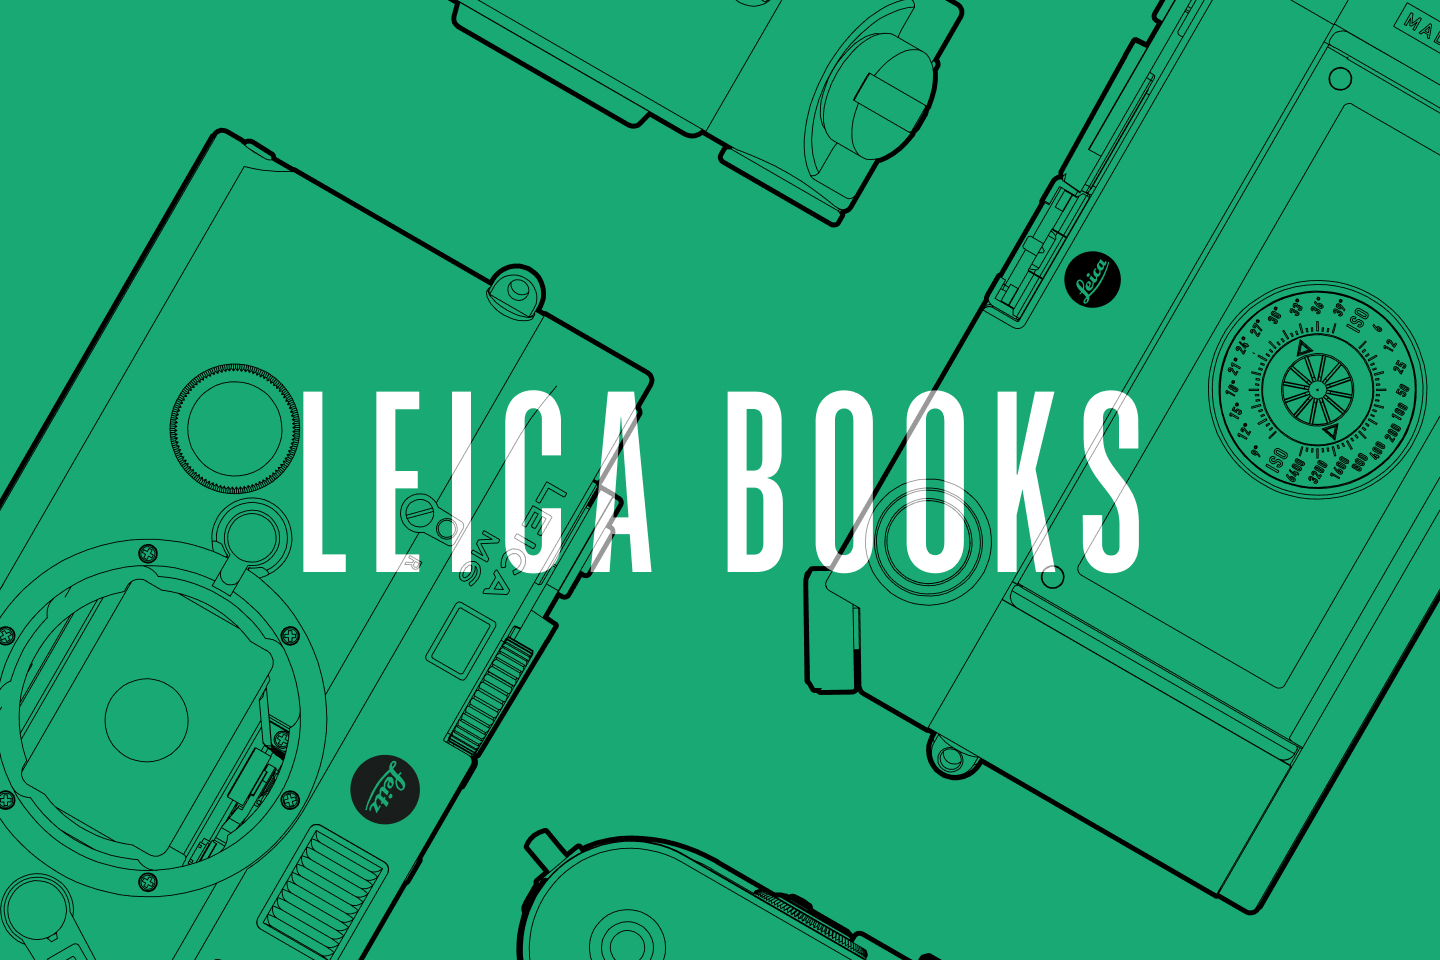 Three Books About Leica